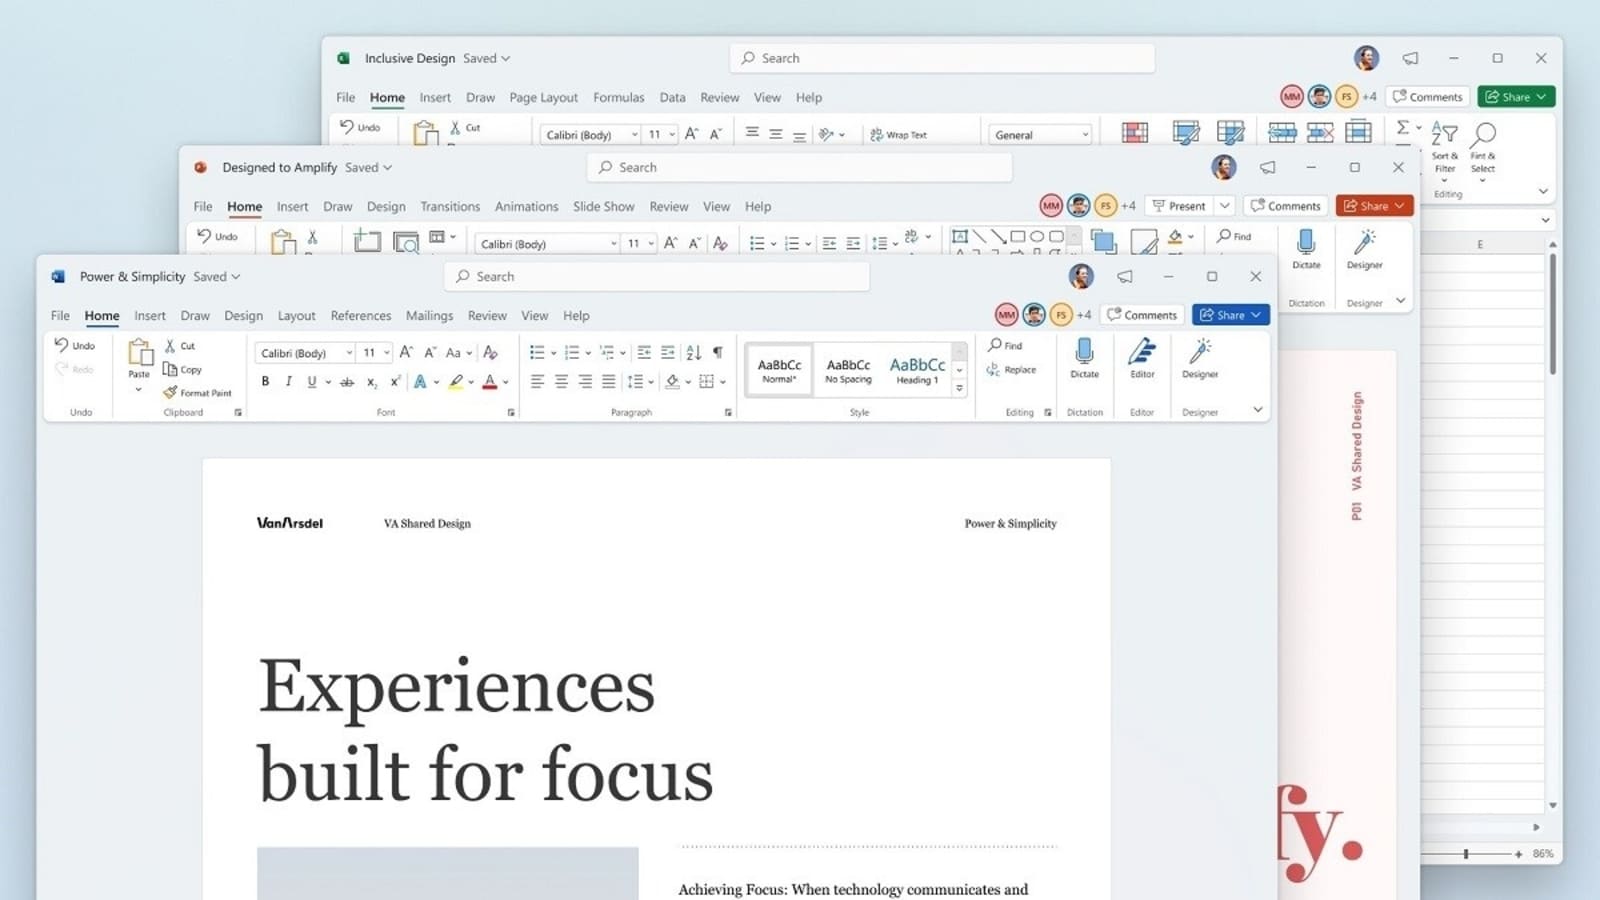 MS Office 2021 launches with Windows 11, check new features | Tech News